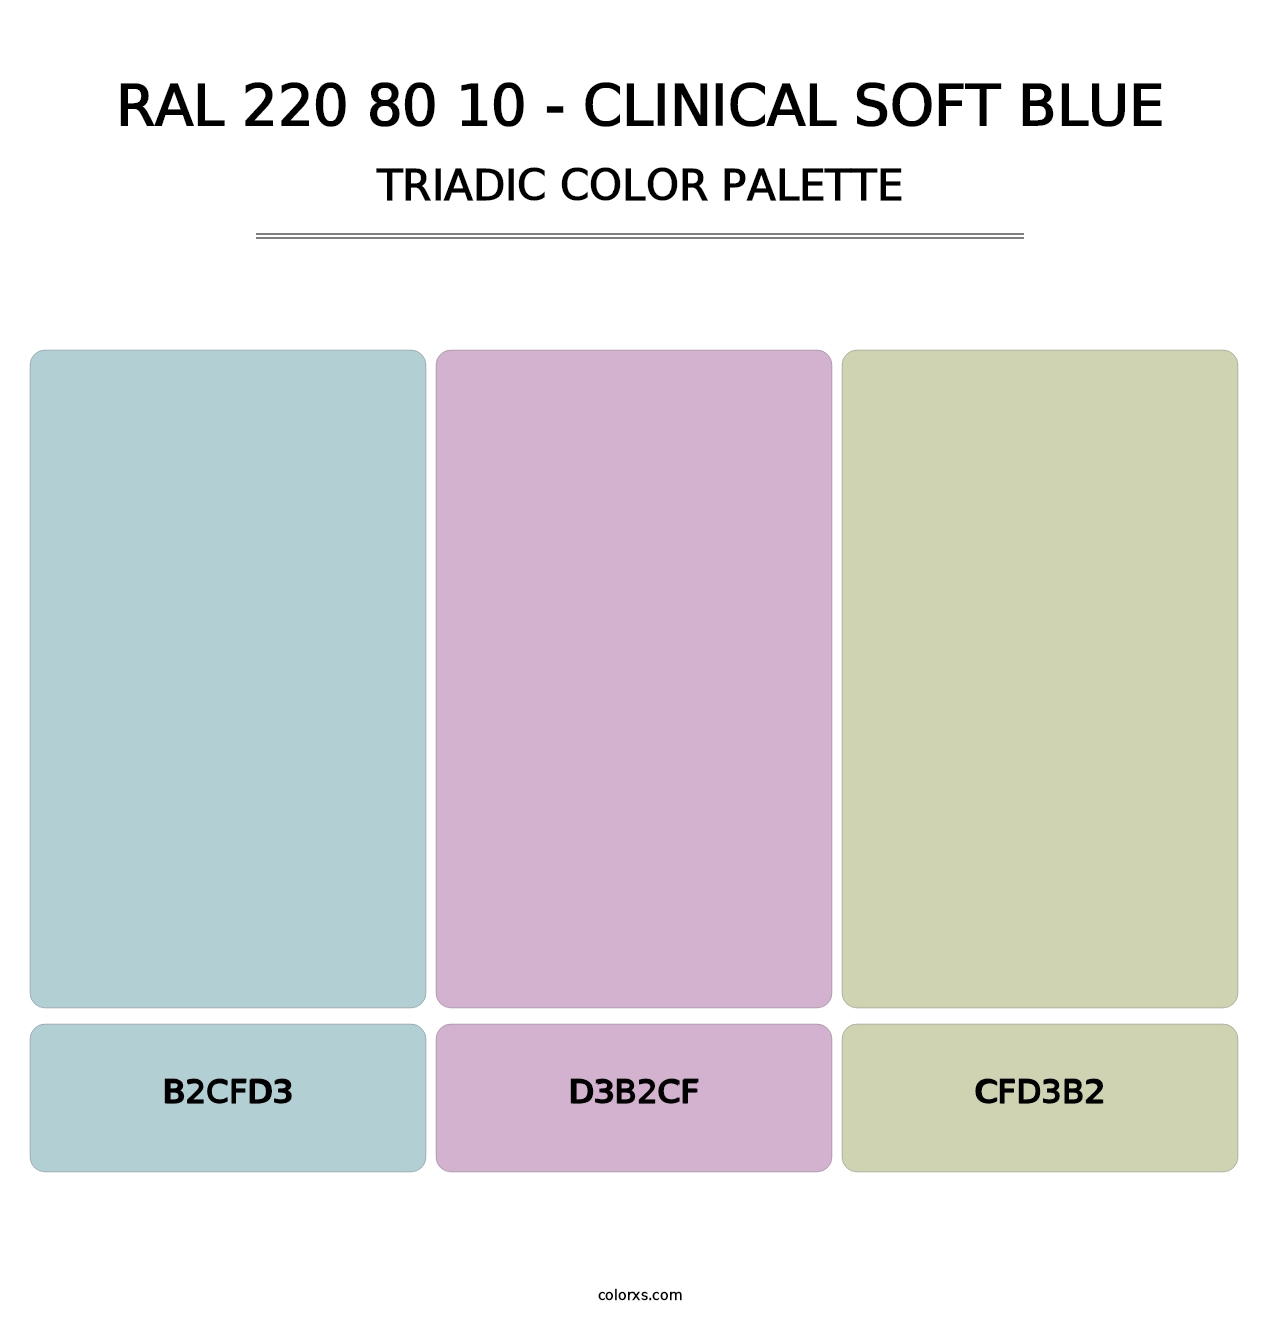 RAL 220 80 10 - Clinical Soft Blue - Triadic Color Palette